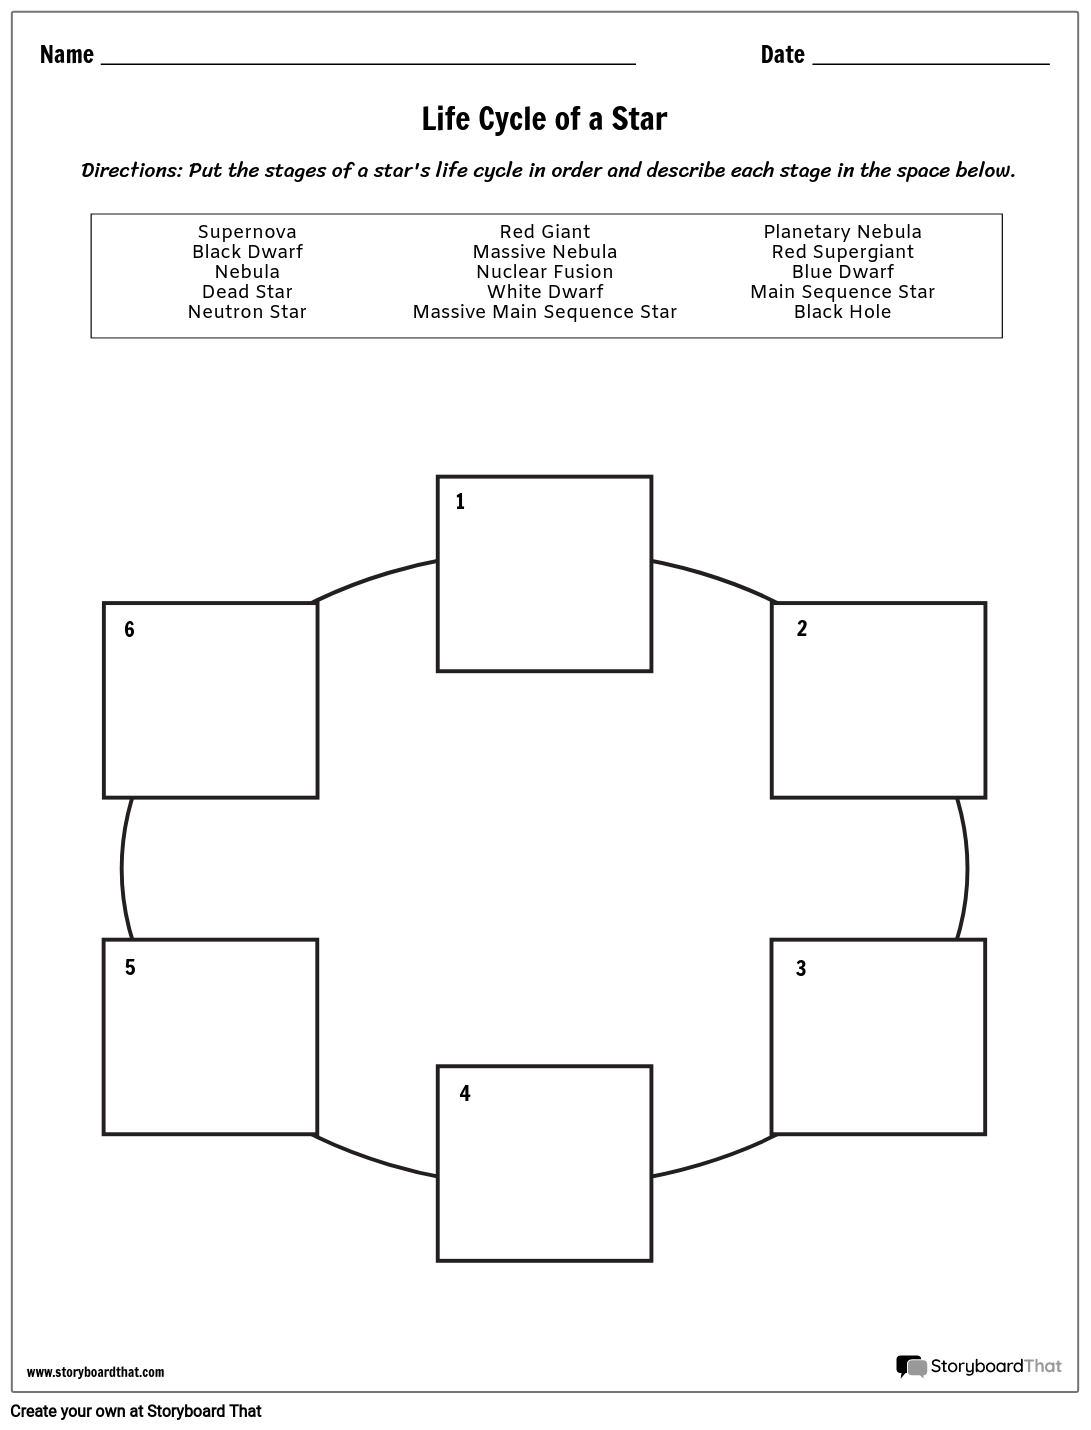 life-cycle-of-a-star-worksheet-activity-space-activities